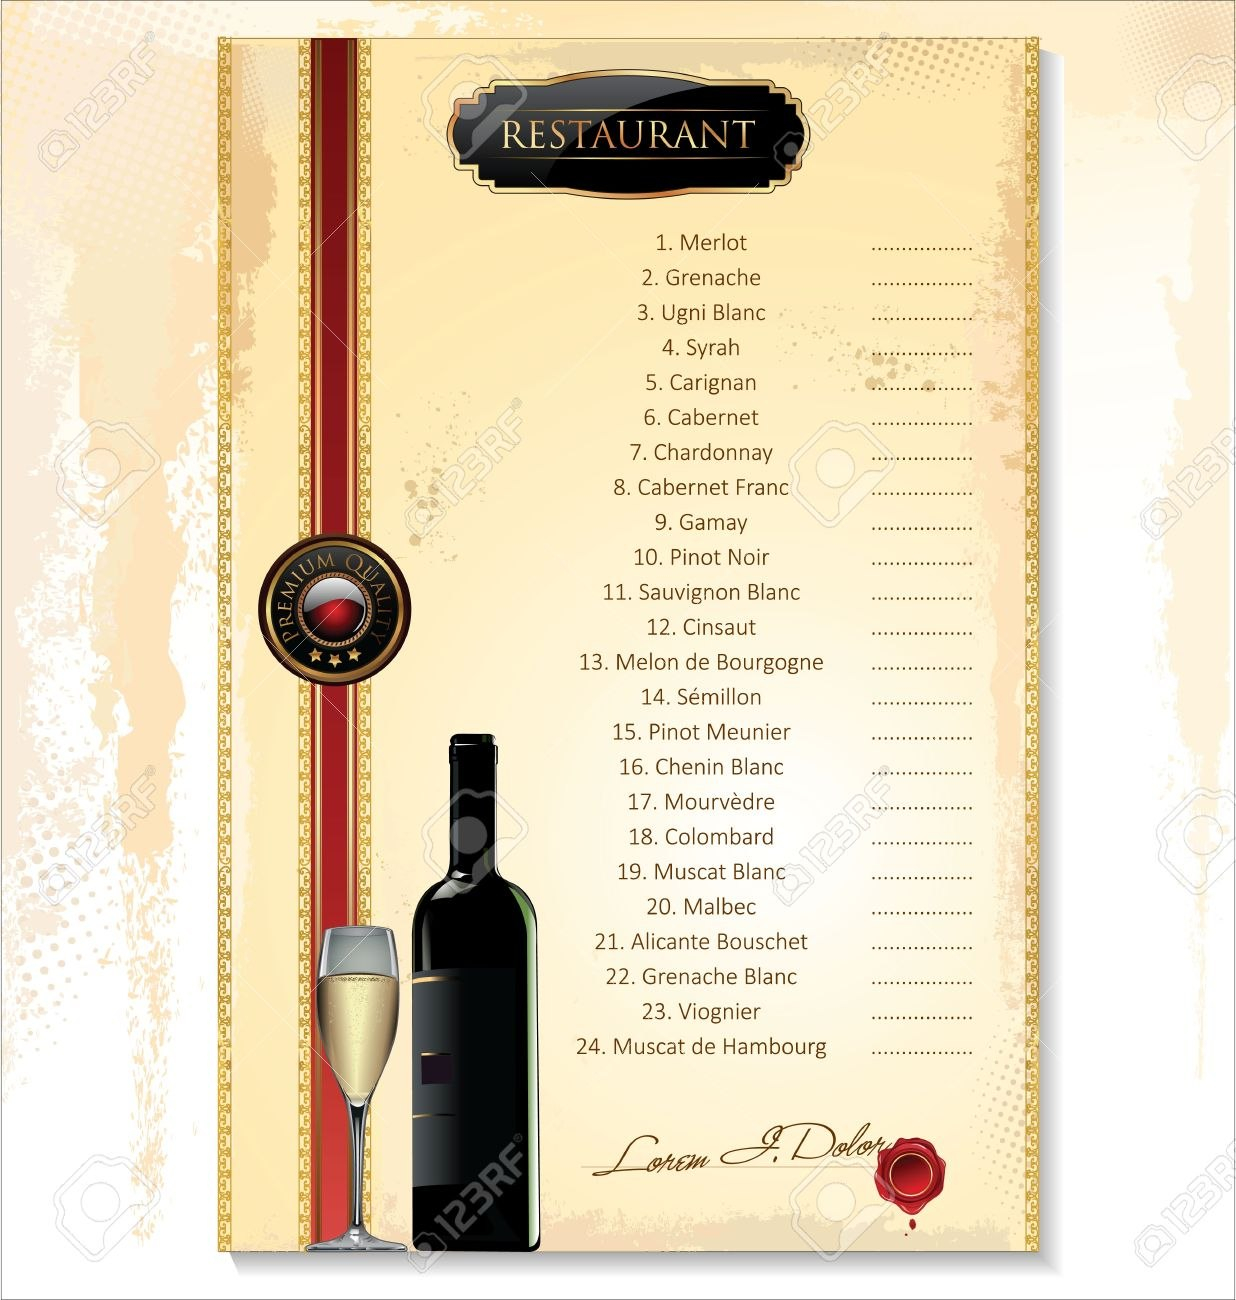 Wine Menu Template With A Price List Royalty Free Cliparts Vectors for Free Wine Menu Template